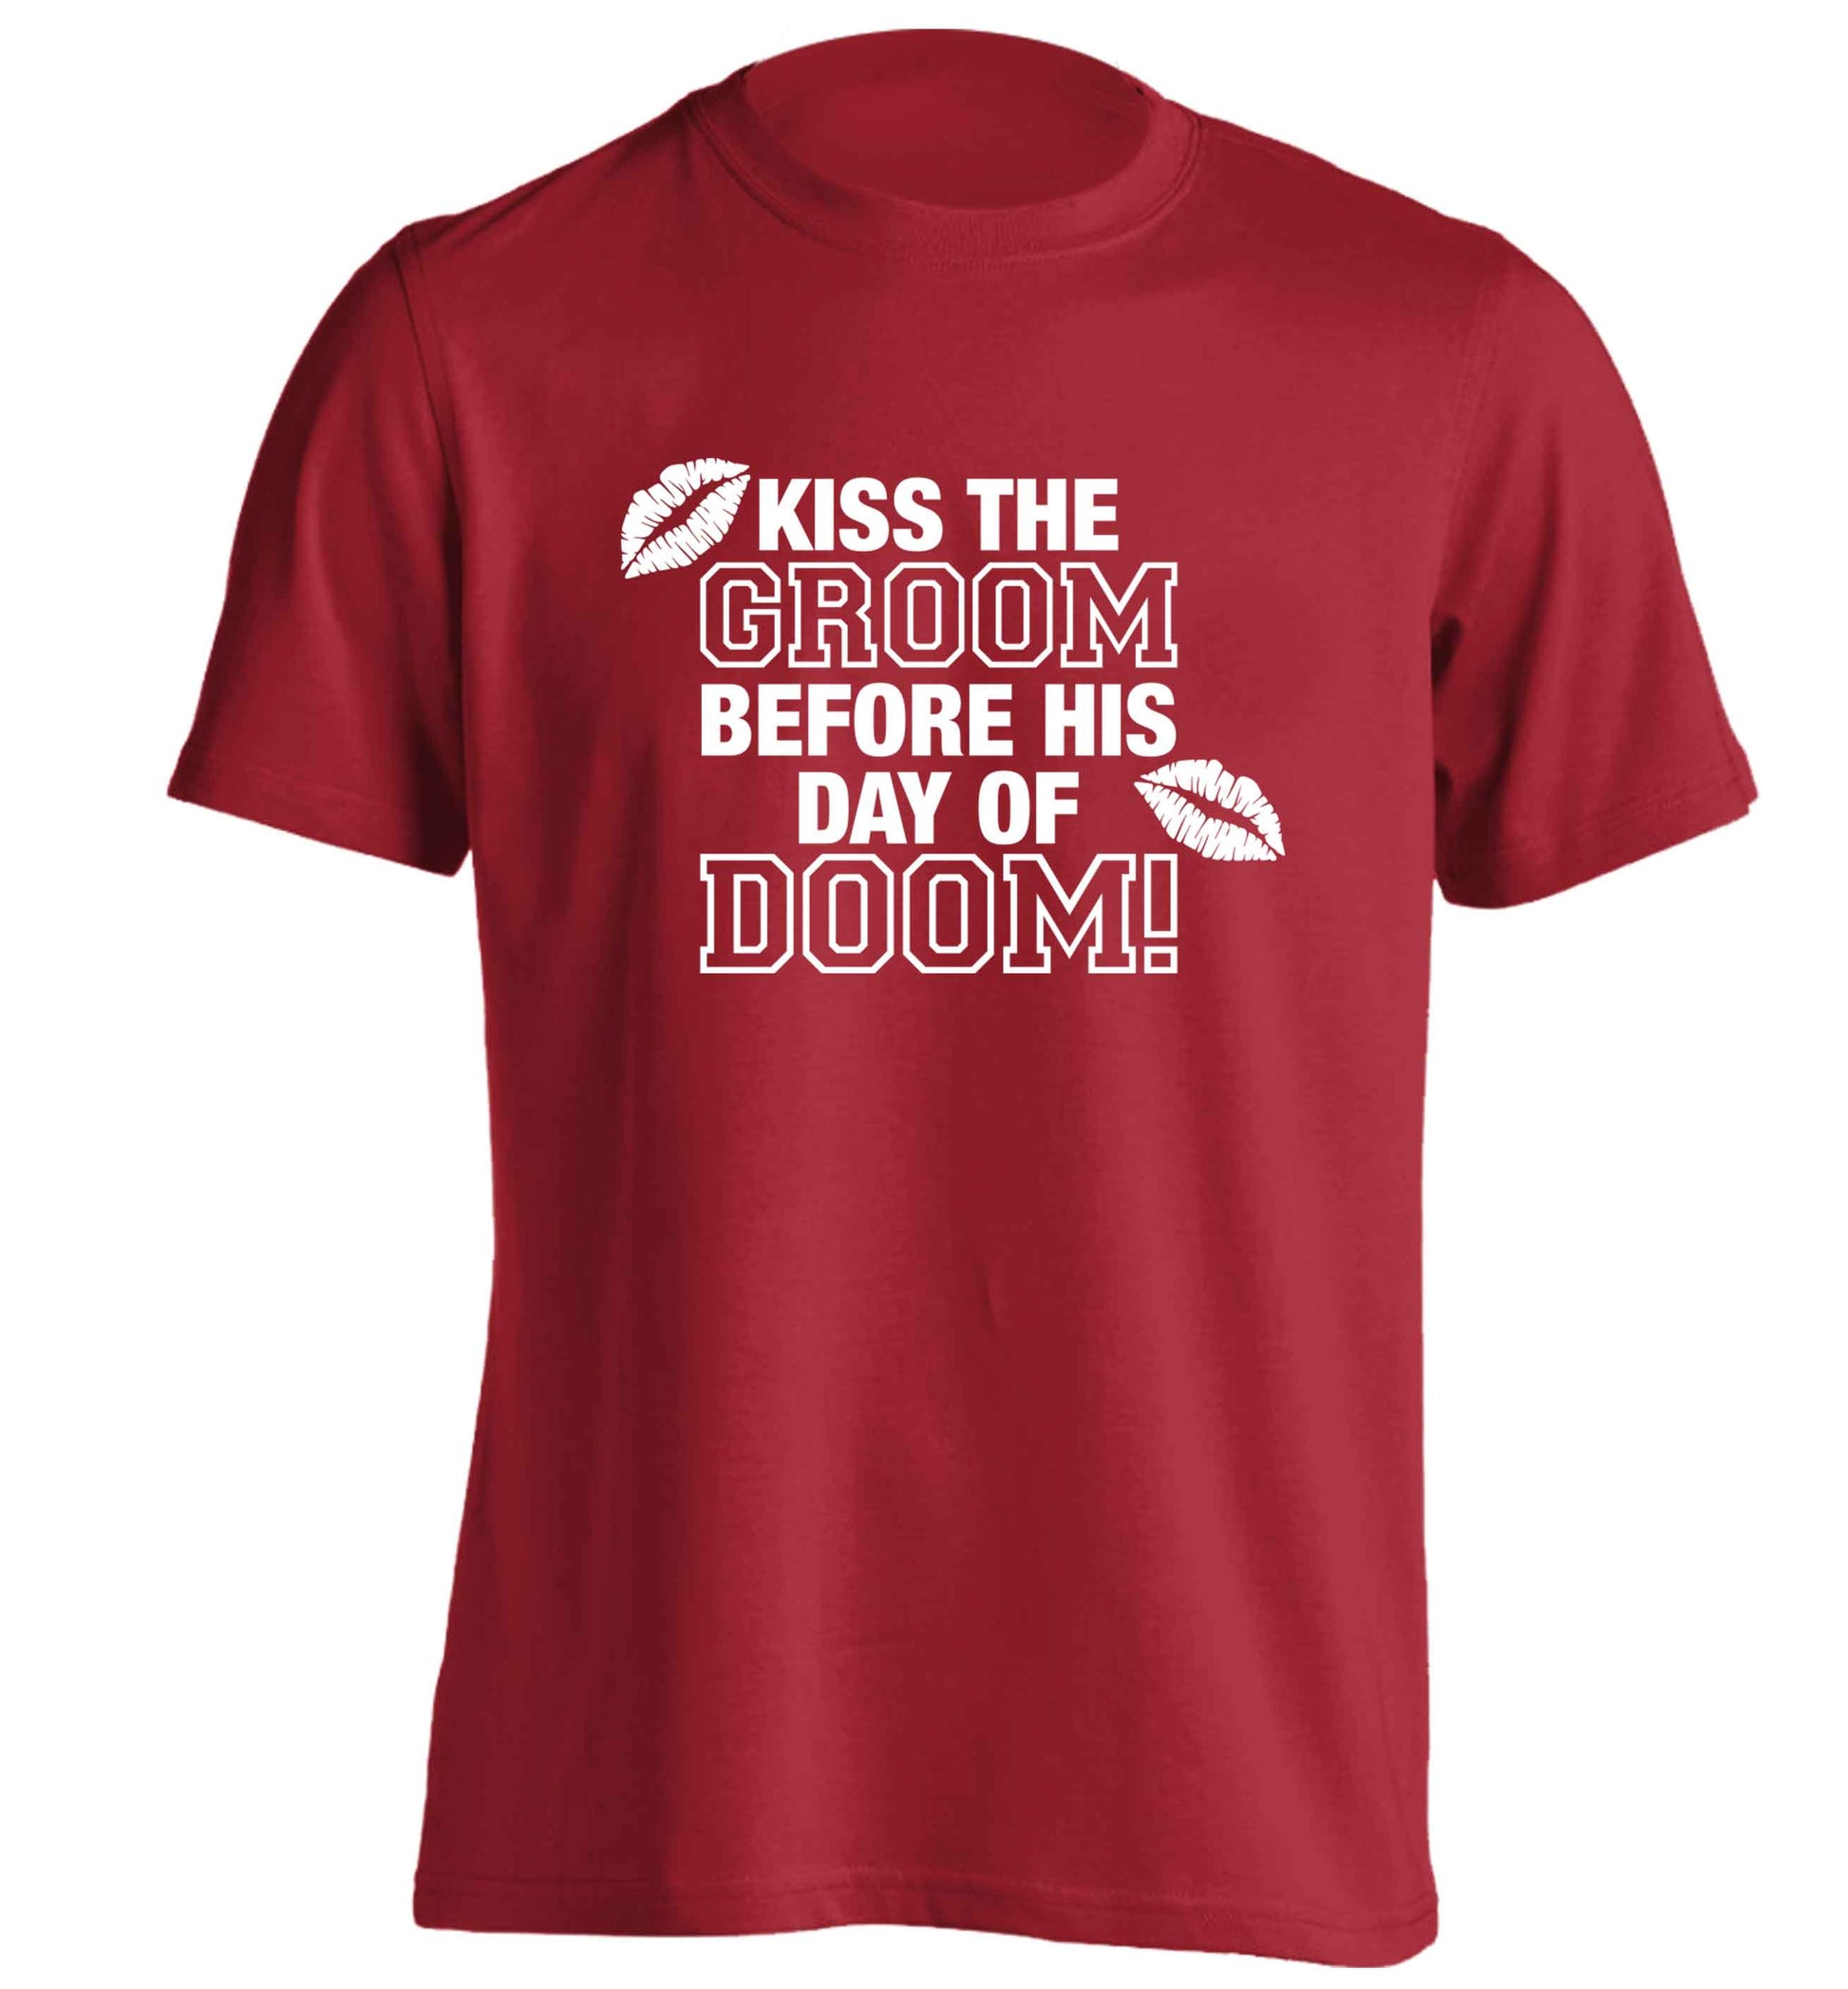 Kiss the groom before his day of doom! adults unisex red Tshirt 2XL